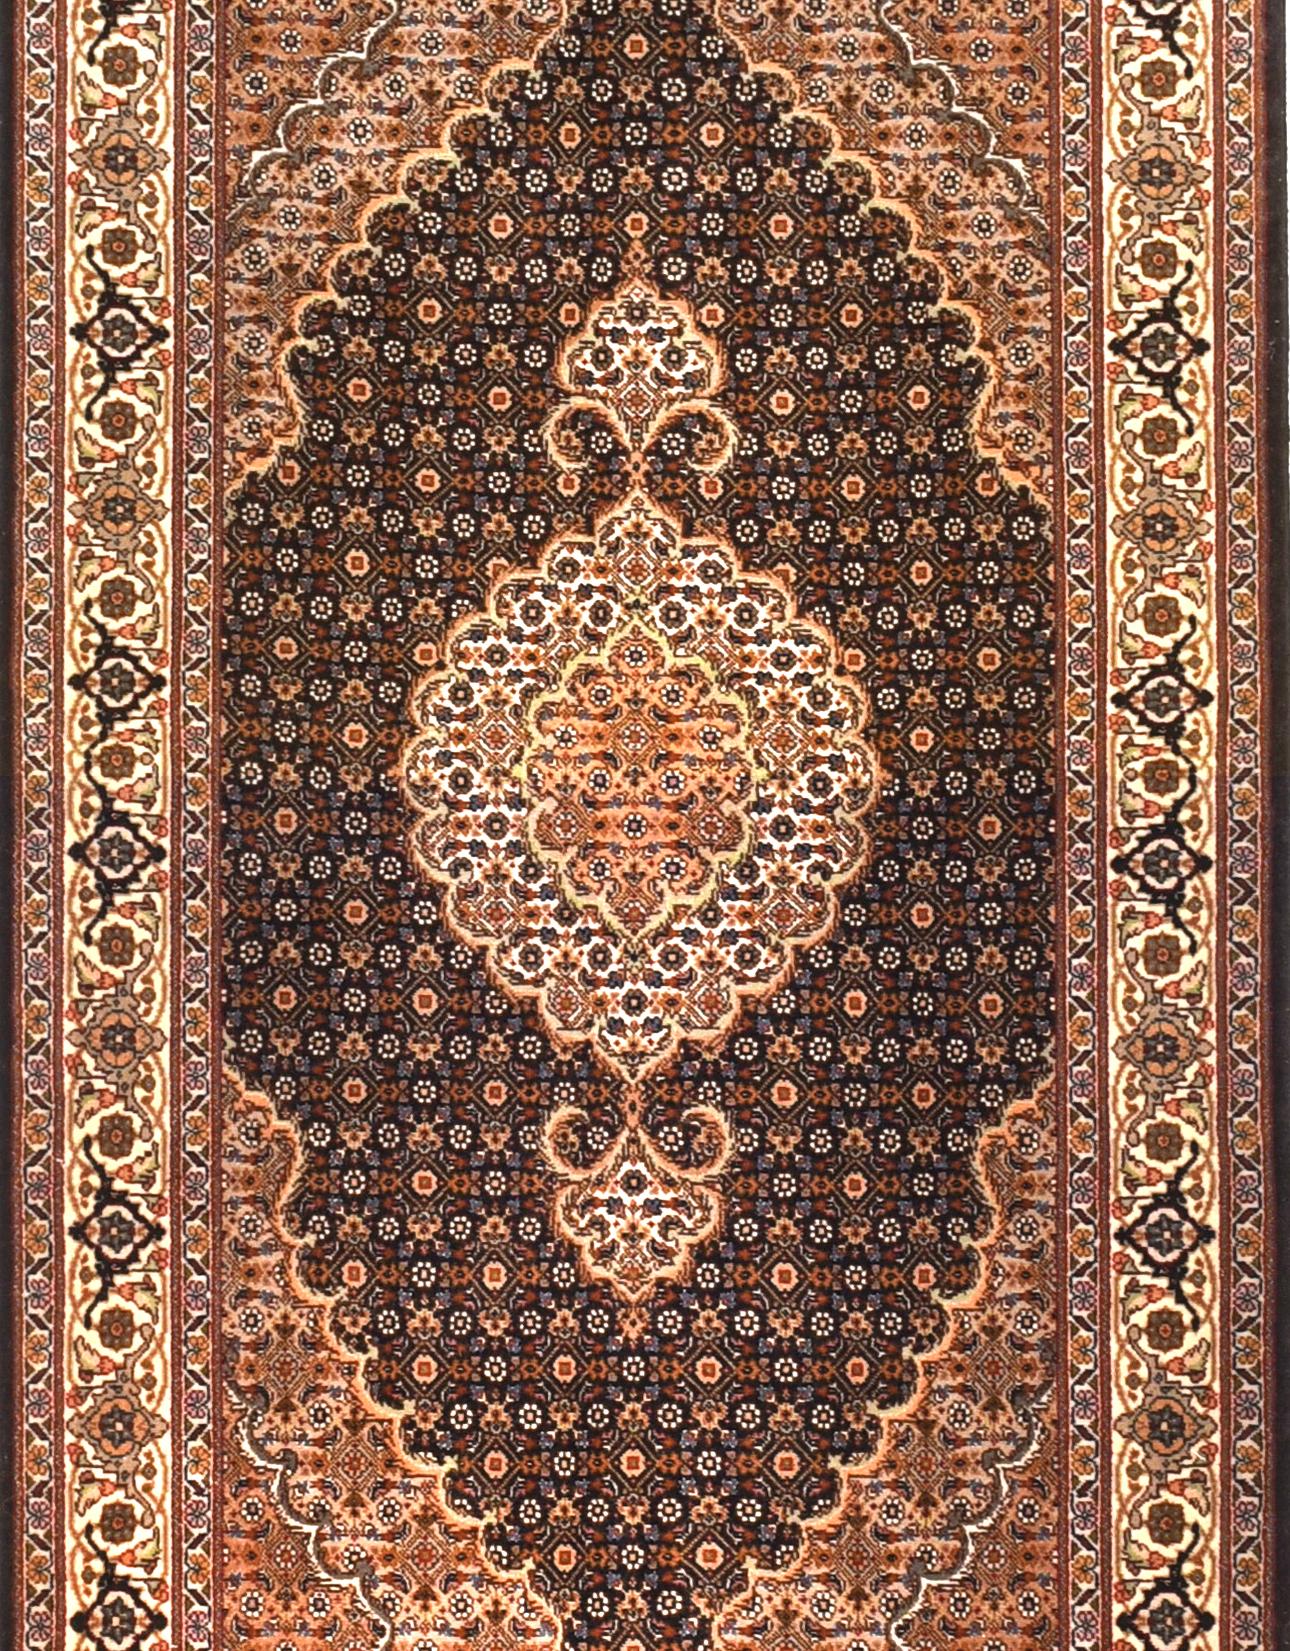 The Tabriz Mahi motif is used for everything from border motifs to medallions and all-over patterns, but the most impressive style is the Persian Tabriz Mahi rug that features an inset medallion decorated with a continuous Mahi pattern. It’s not